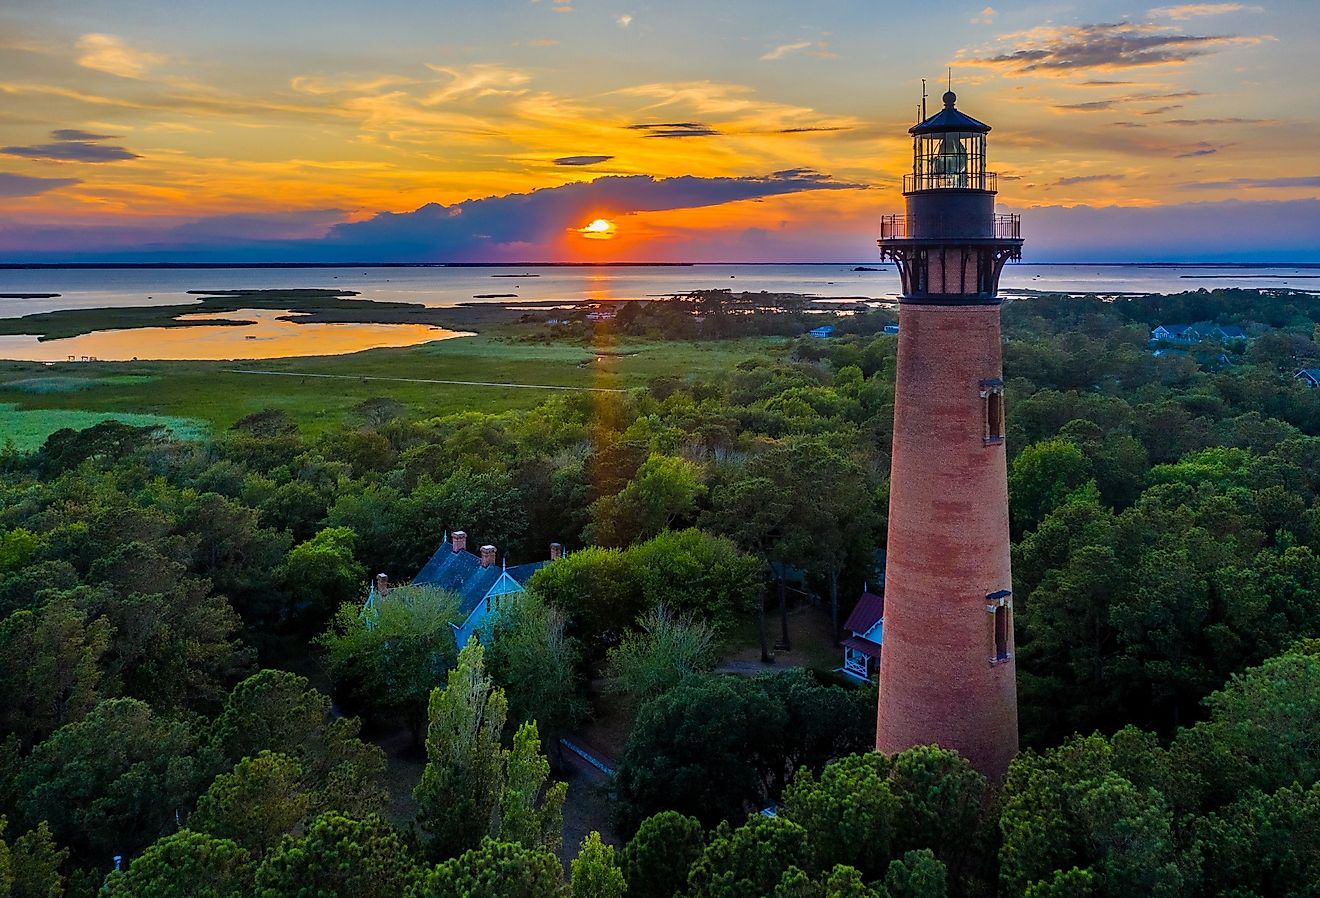 Aerial view of Currituck Beach Lighthouse at sunset near Corolla, North Carolina.